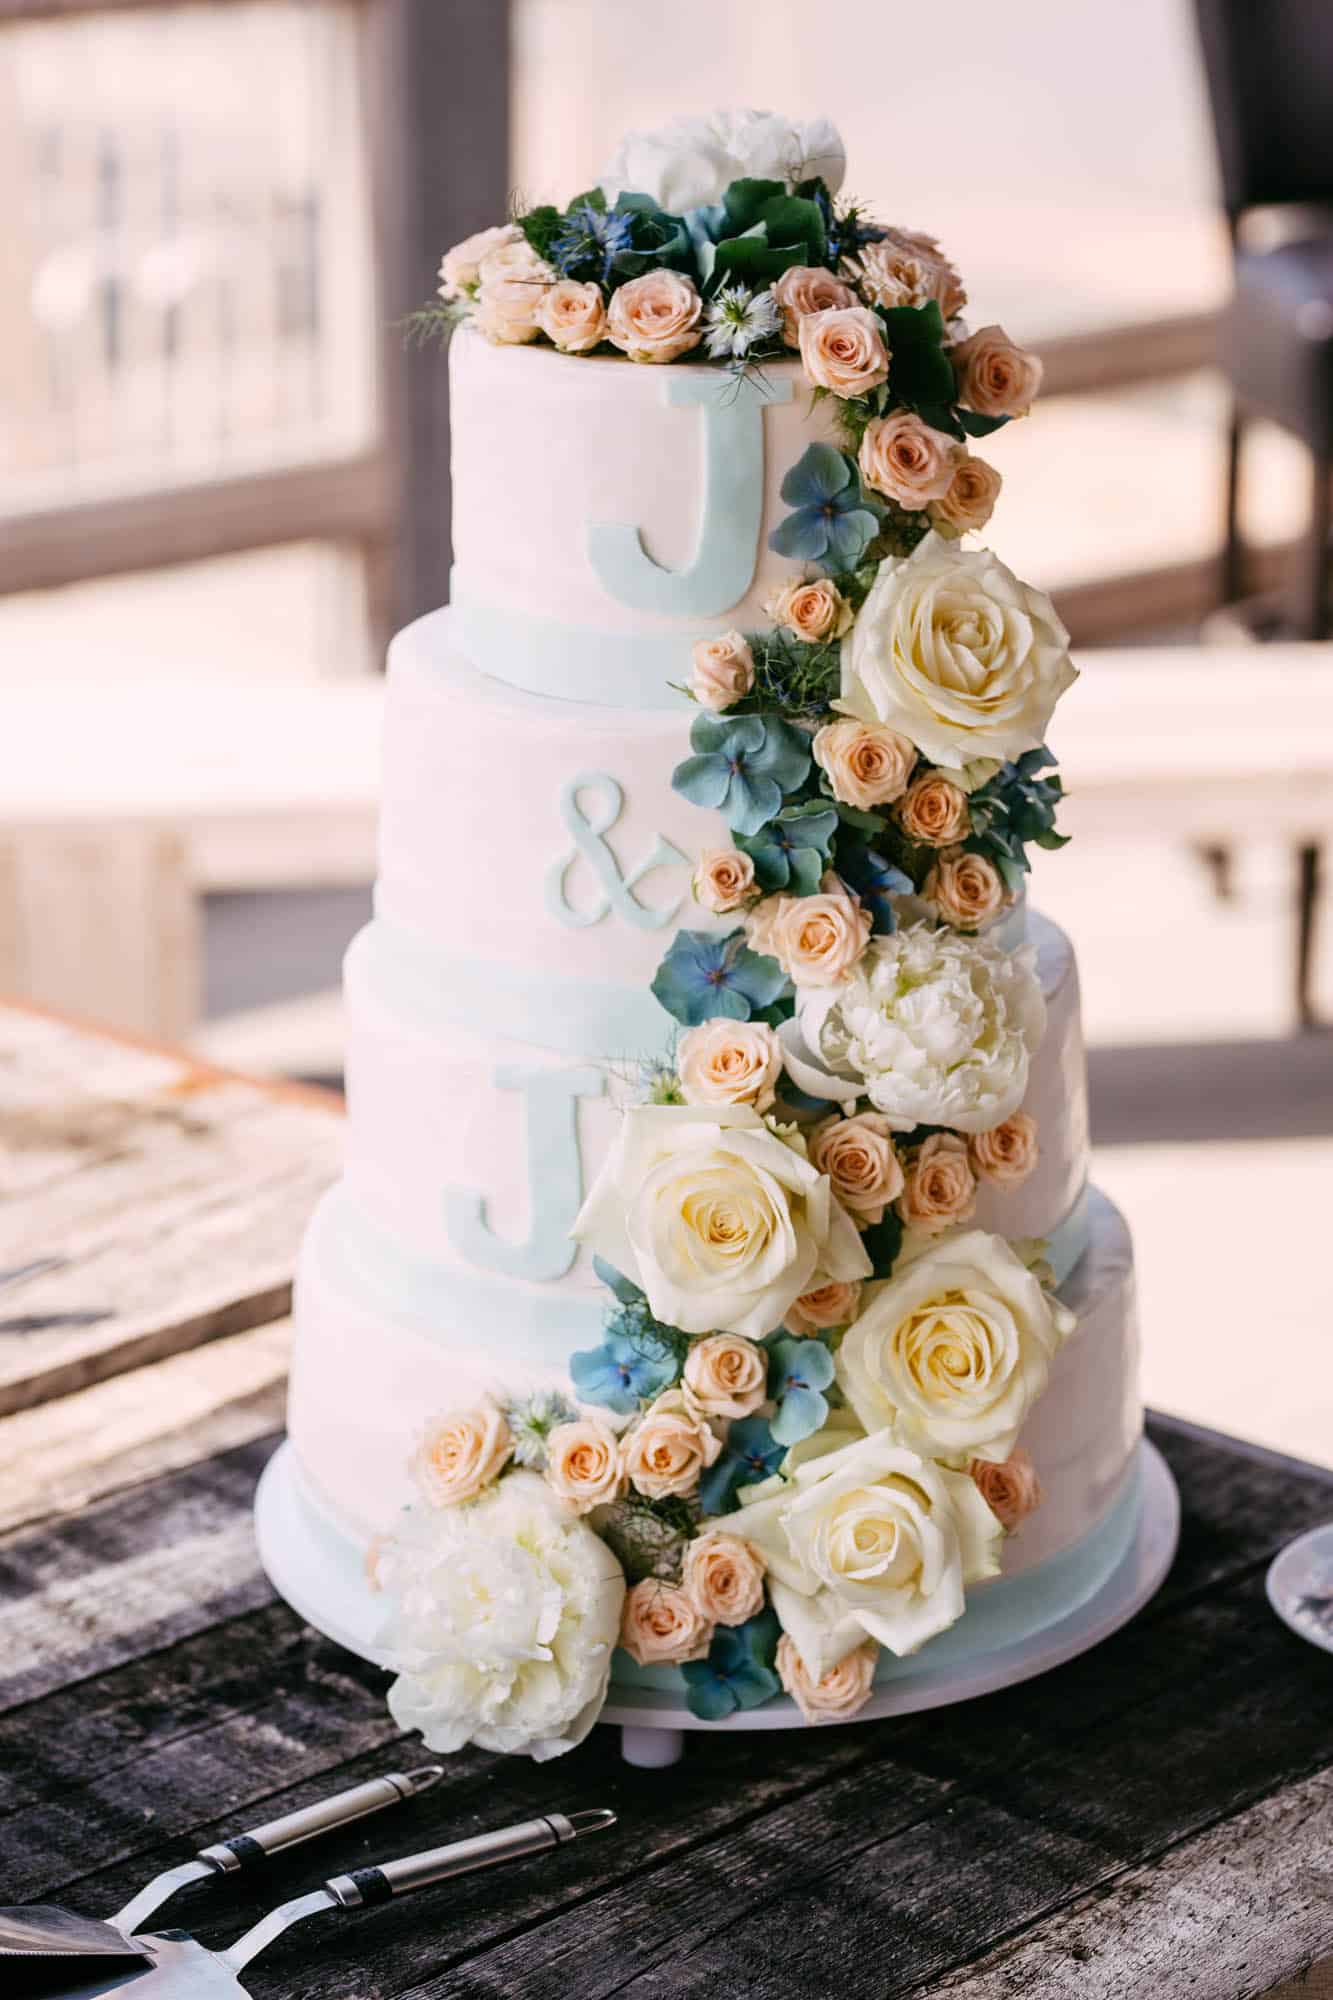 Light blue wedding cake with flowers and initials